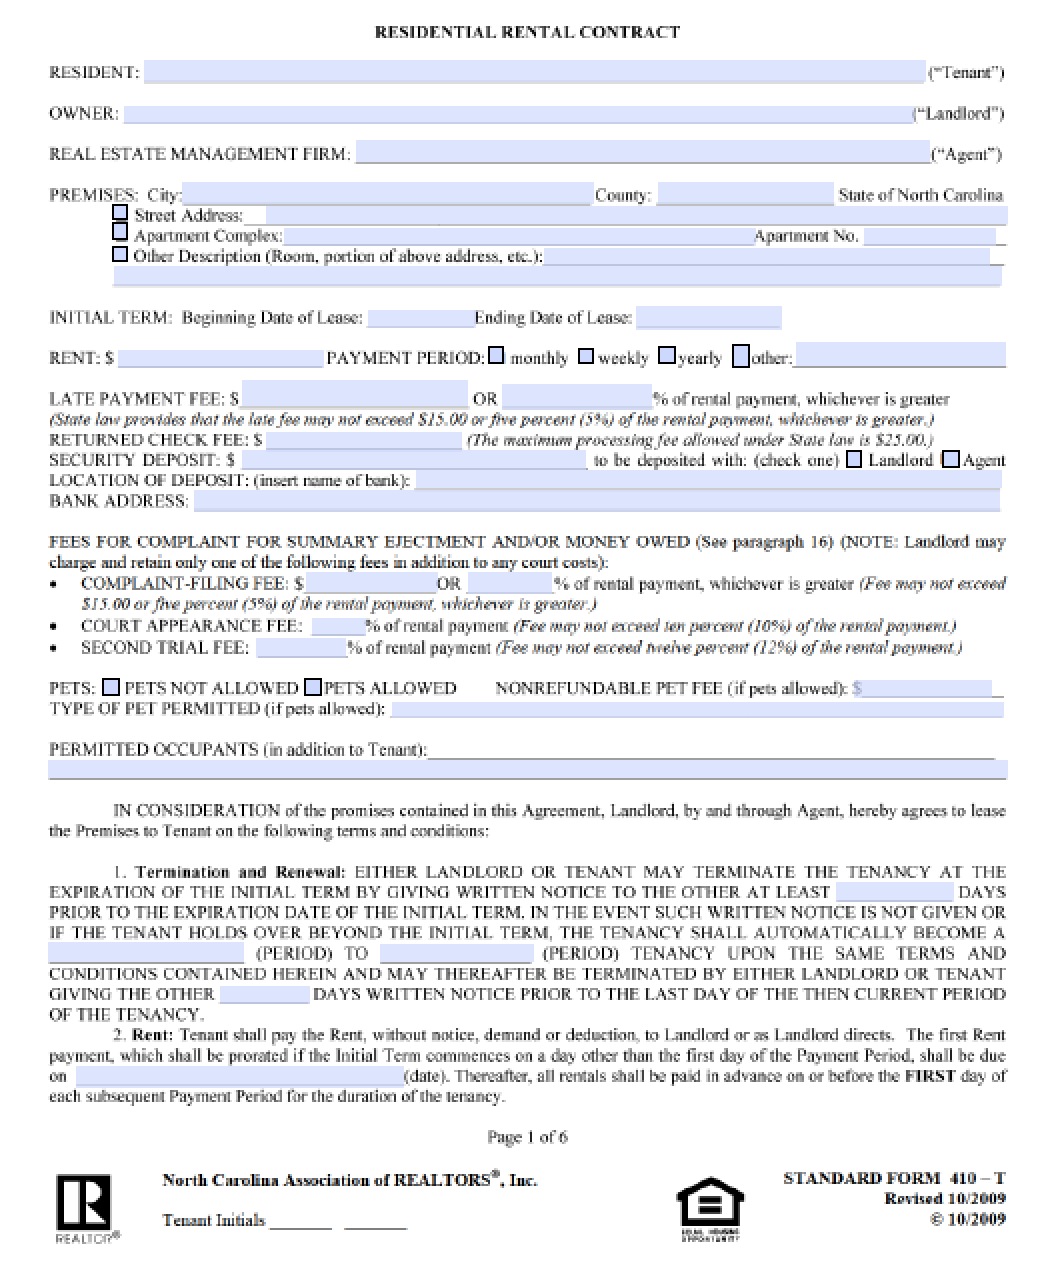 Apartment Association Of Nc Residential Lease Agreement Apartment Post